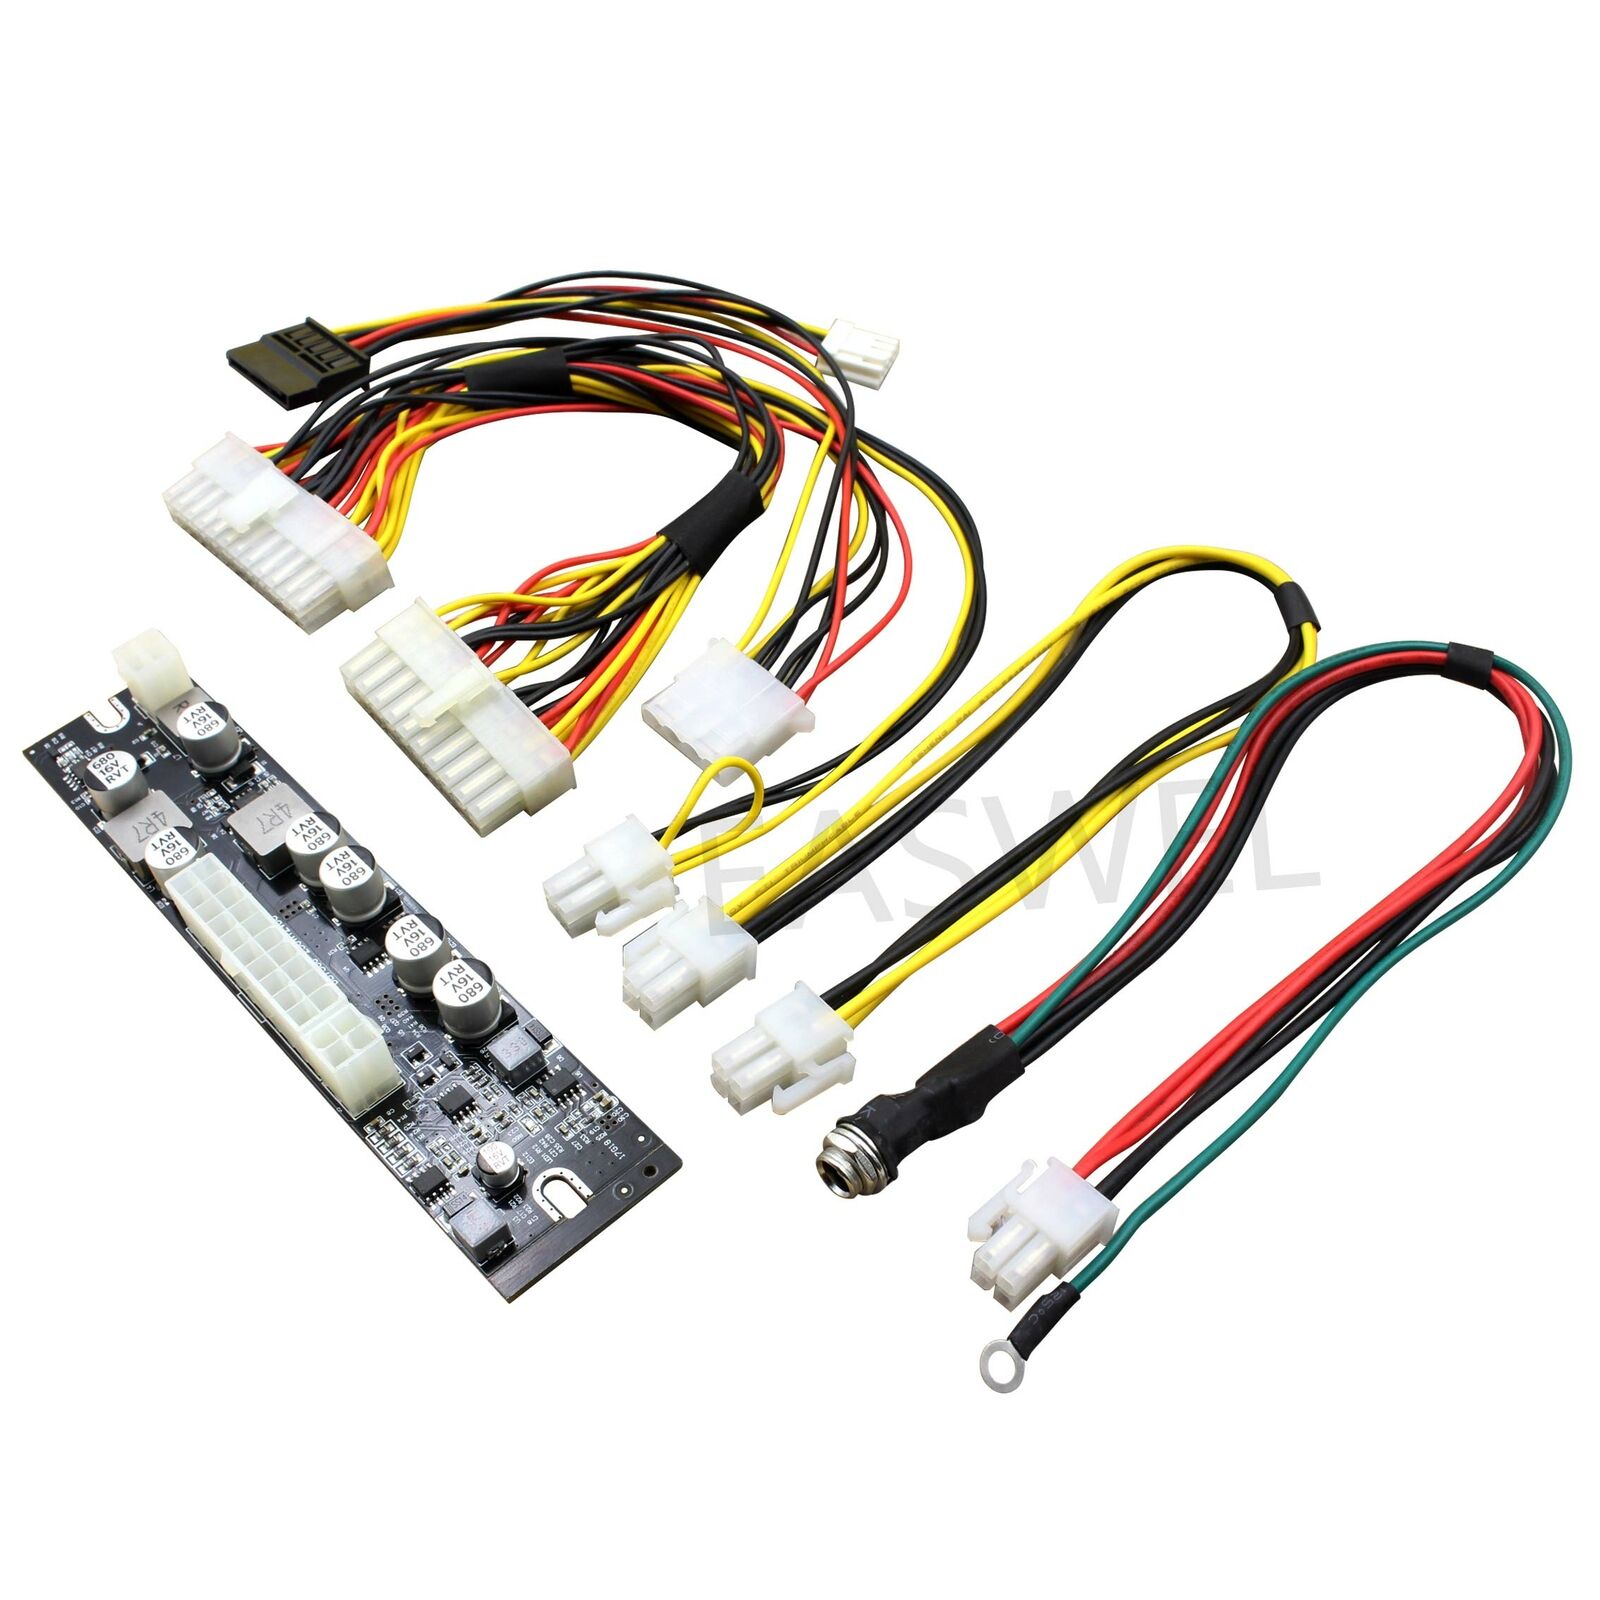 DC 12V 250W Pico PSU 24Pin Mini ITX DC To ATX PC Power Supply Module With  Cable